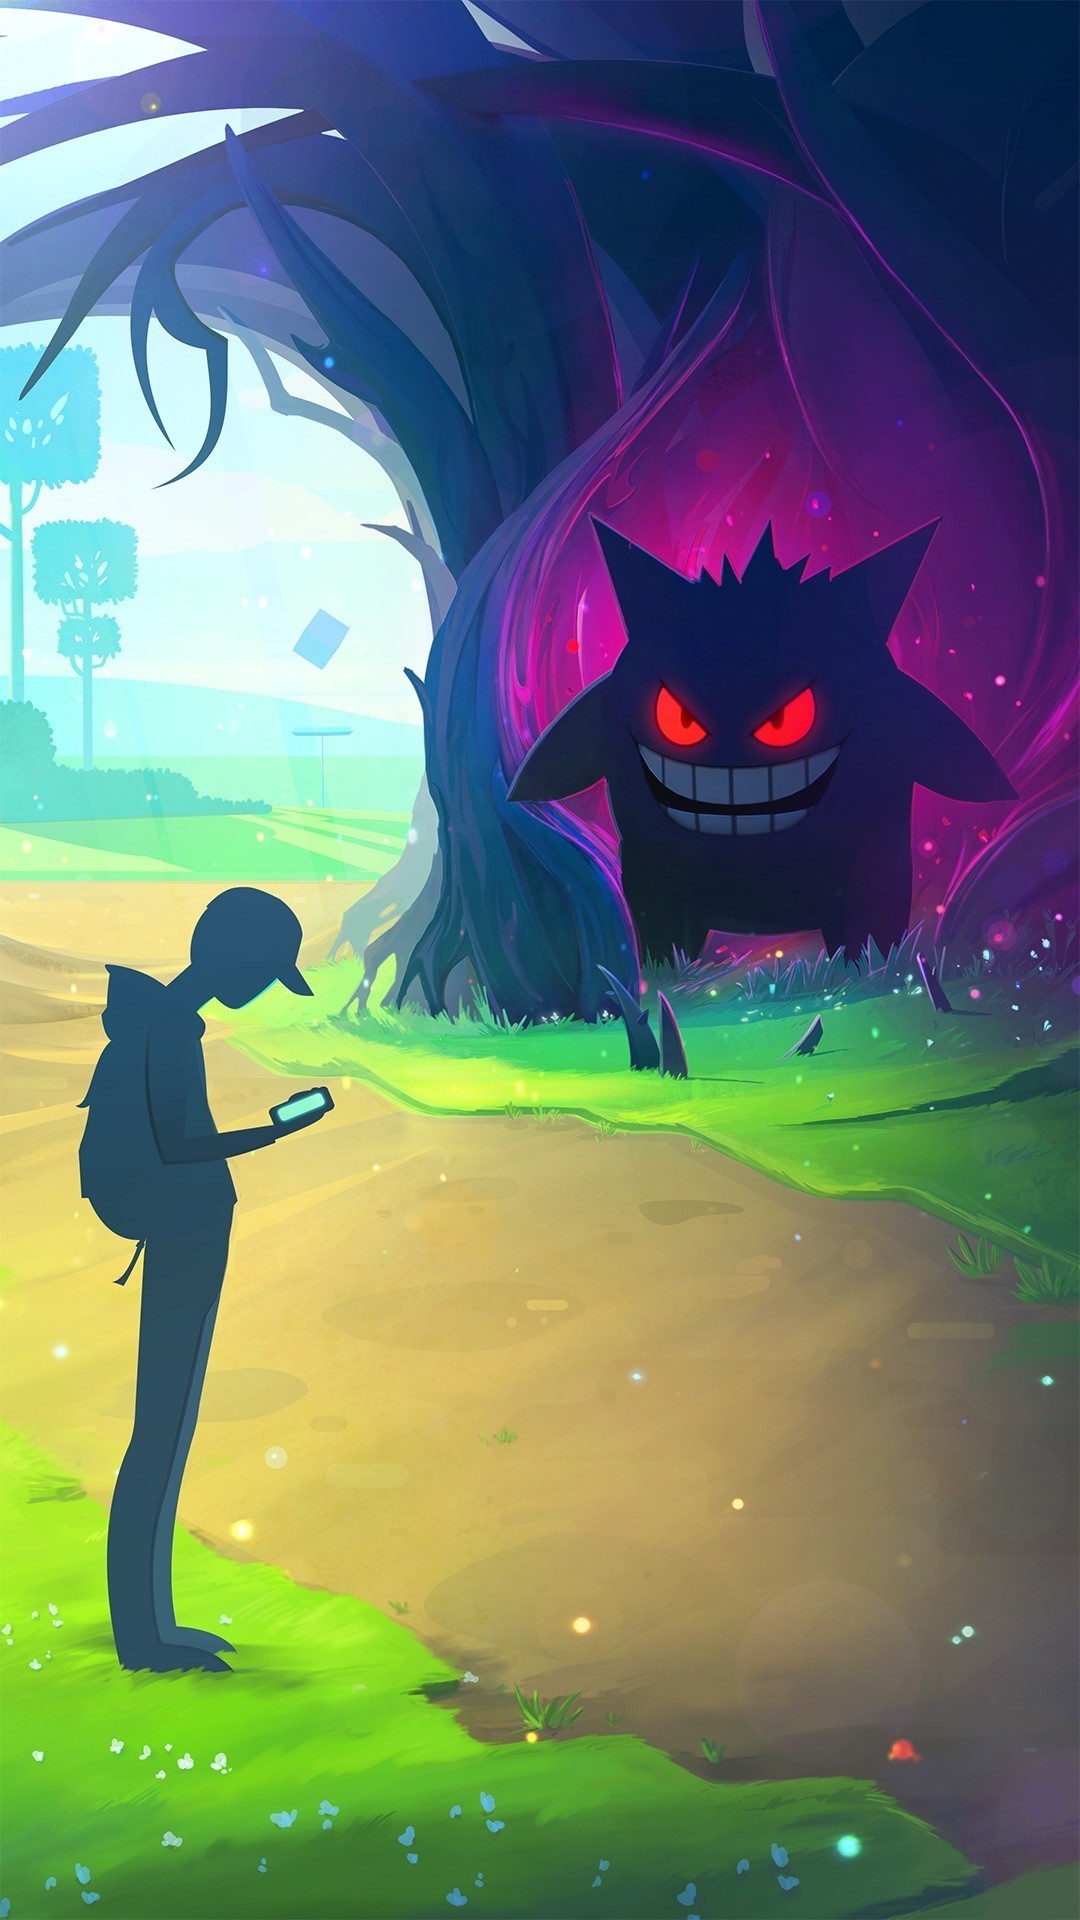 A trainer checks his Nearby radar while Gengar emerges, eyes glowing red,  from the ghostly bowels of an ancient PokÃ©mon tree.